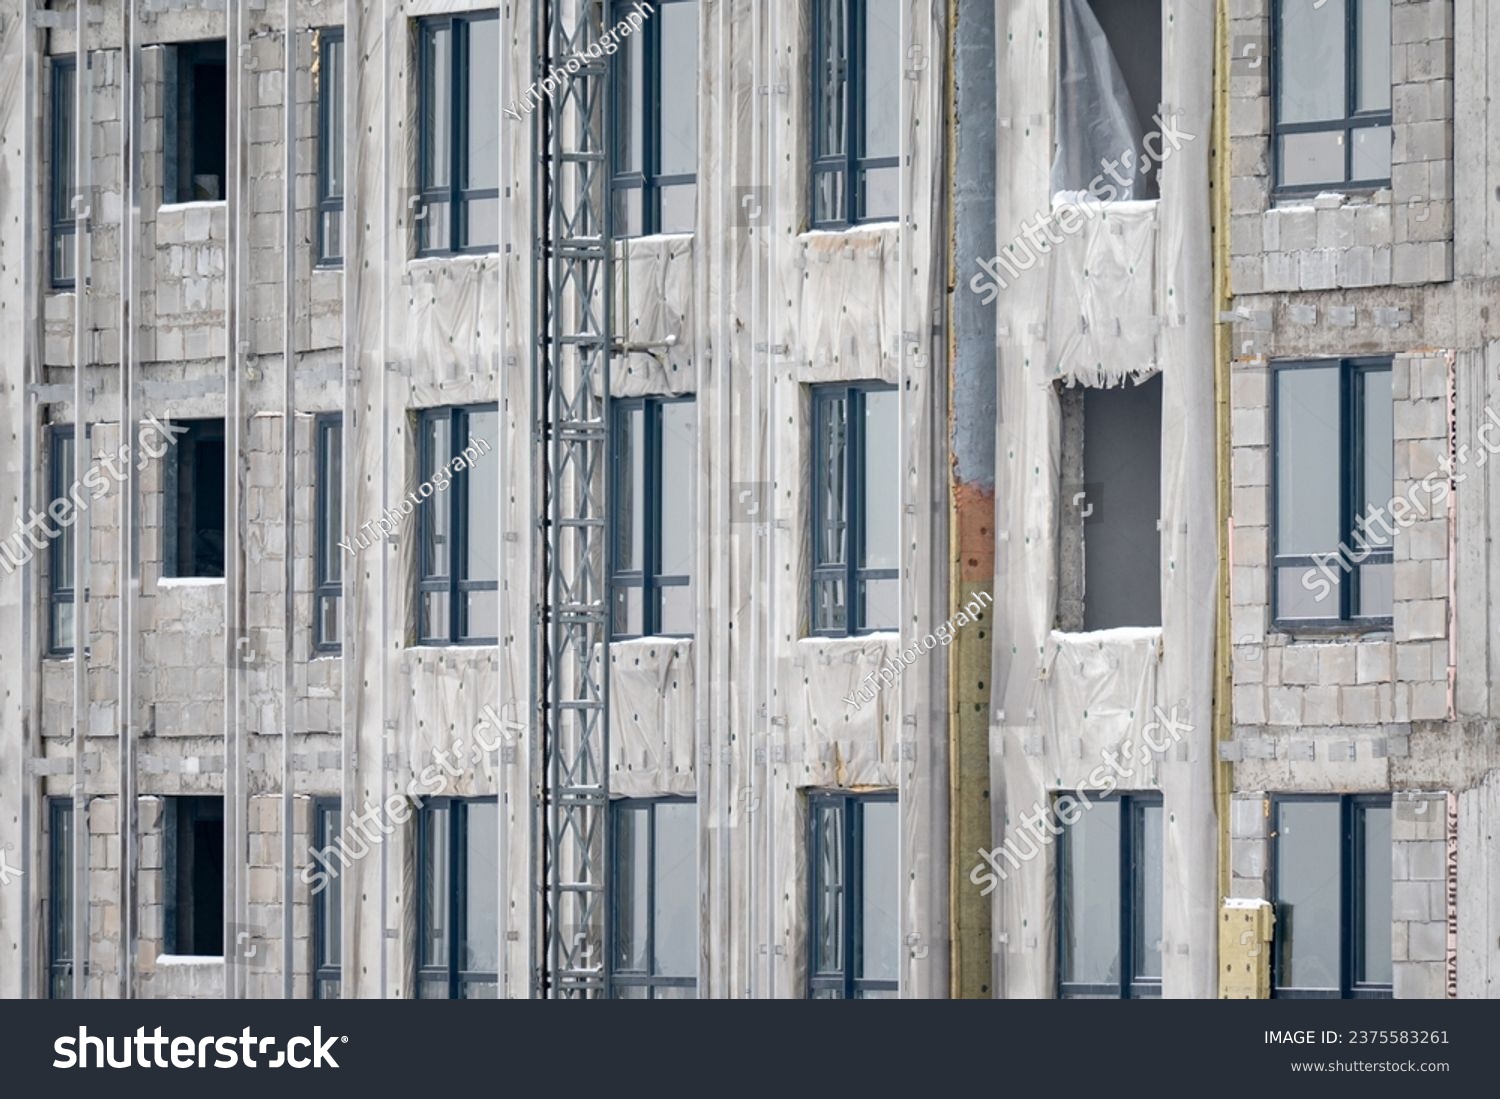 Construction of a new house. View of a fragment of an unfinished building made of gray concrete with multi-storey windows without glass. The concept of building and housing provision. #2375583261